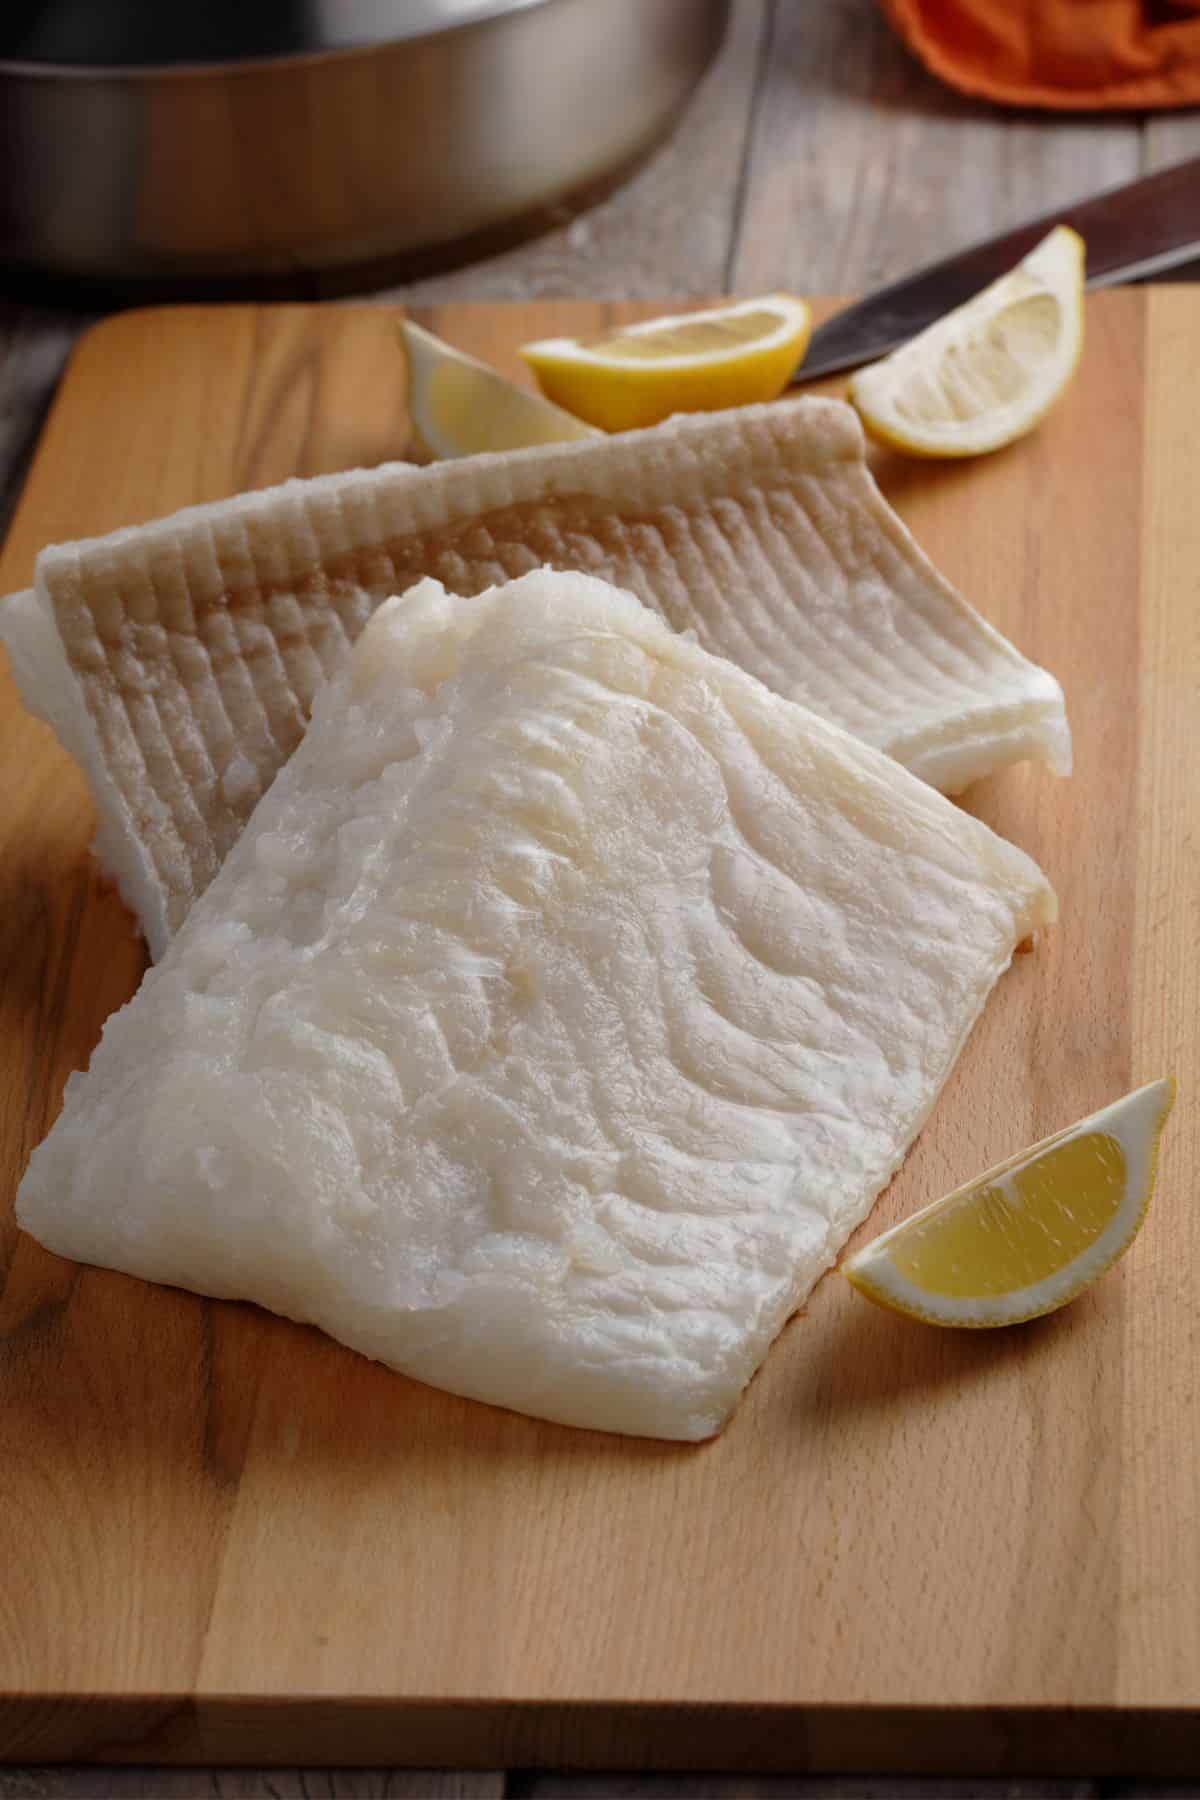 Codfish fillets with lemon wedges on cutting board.